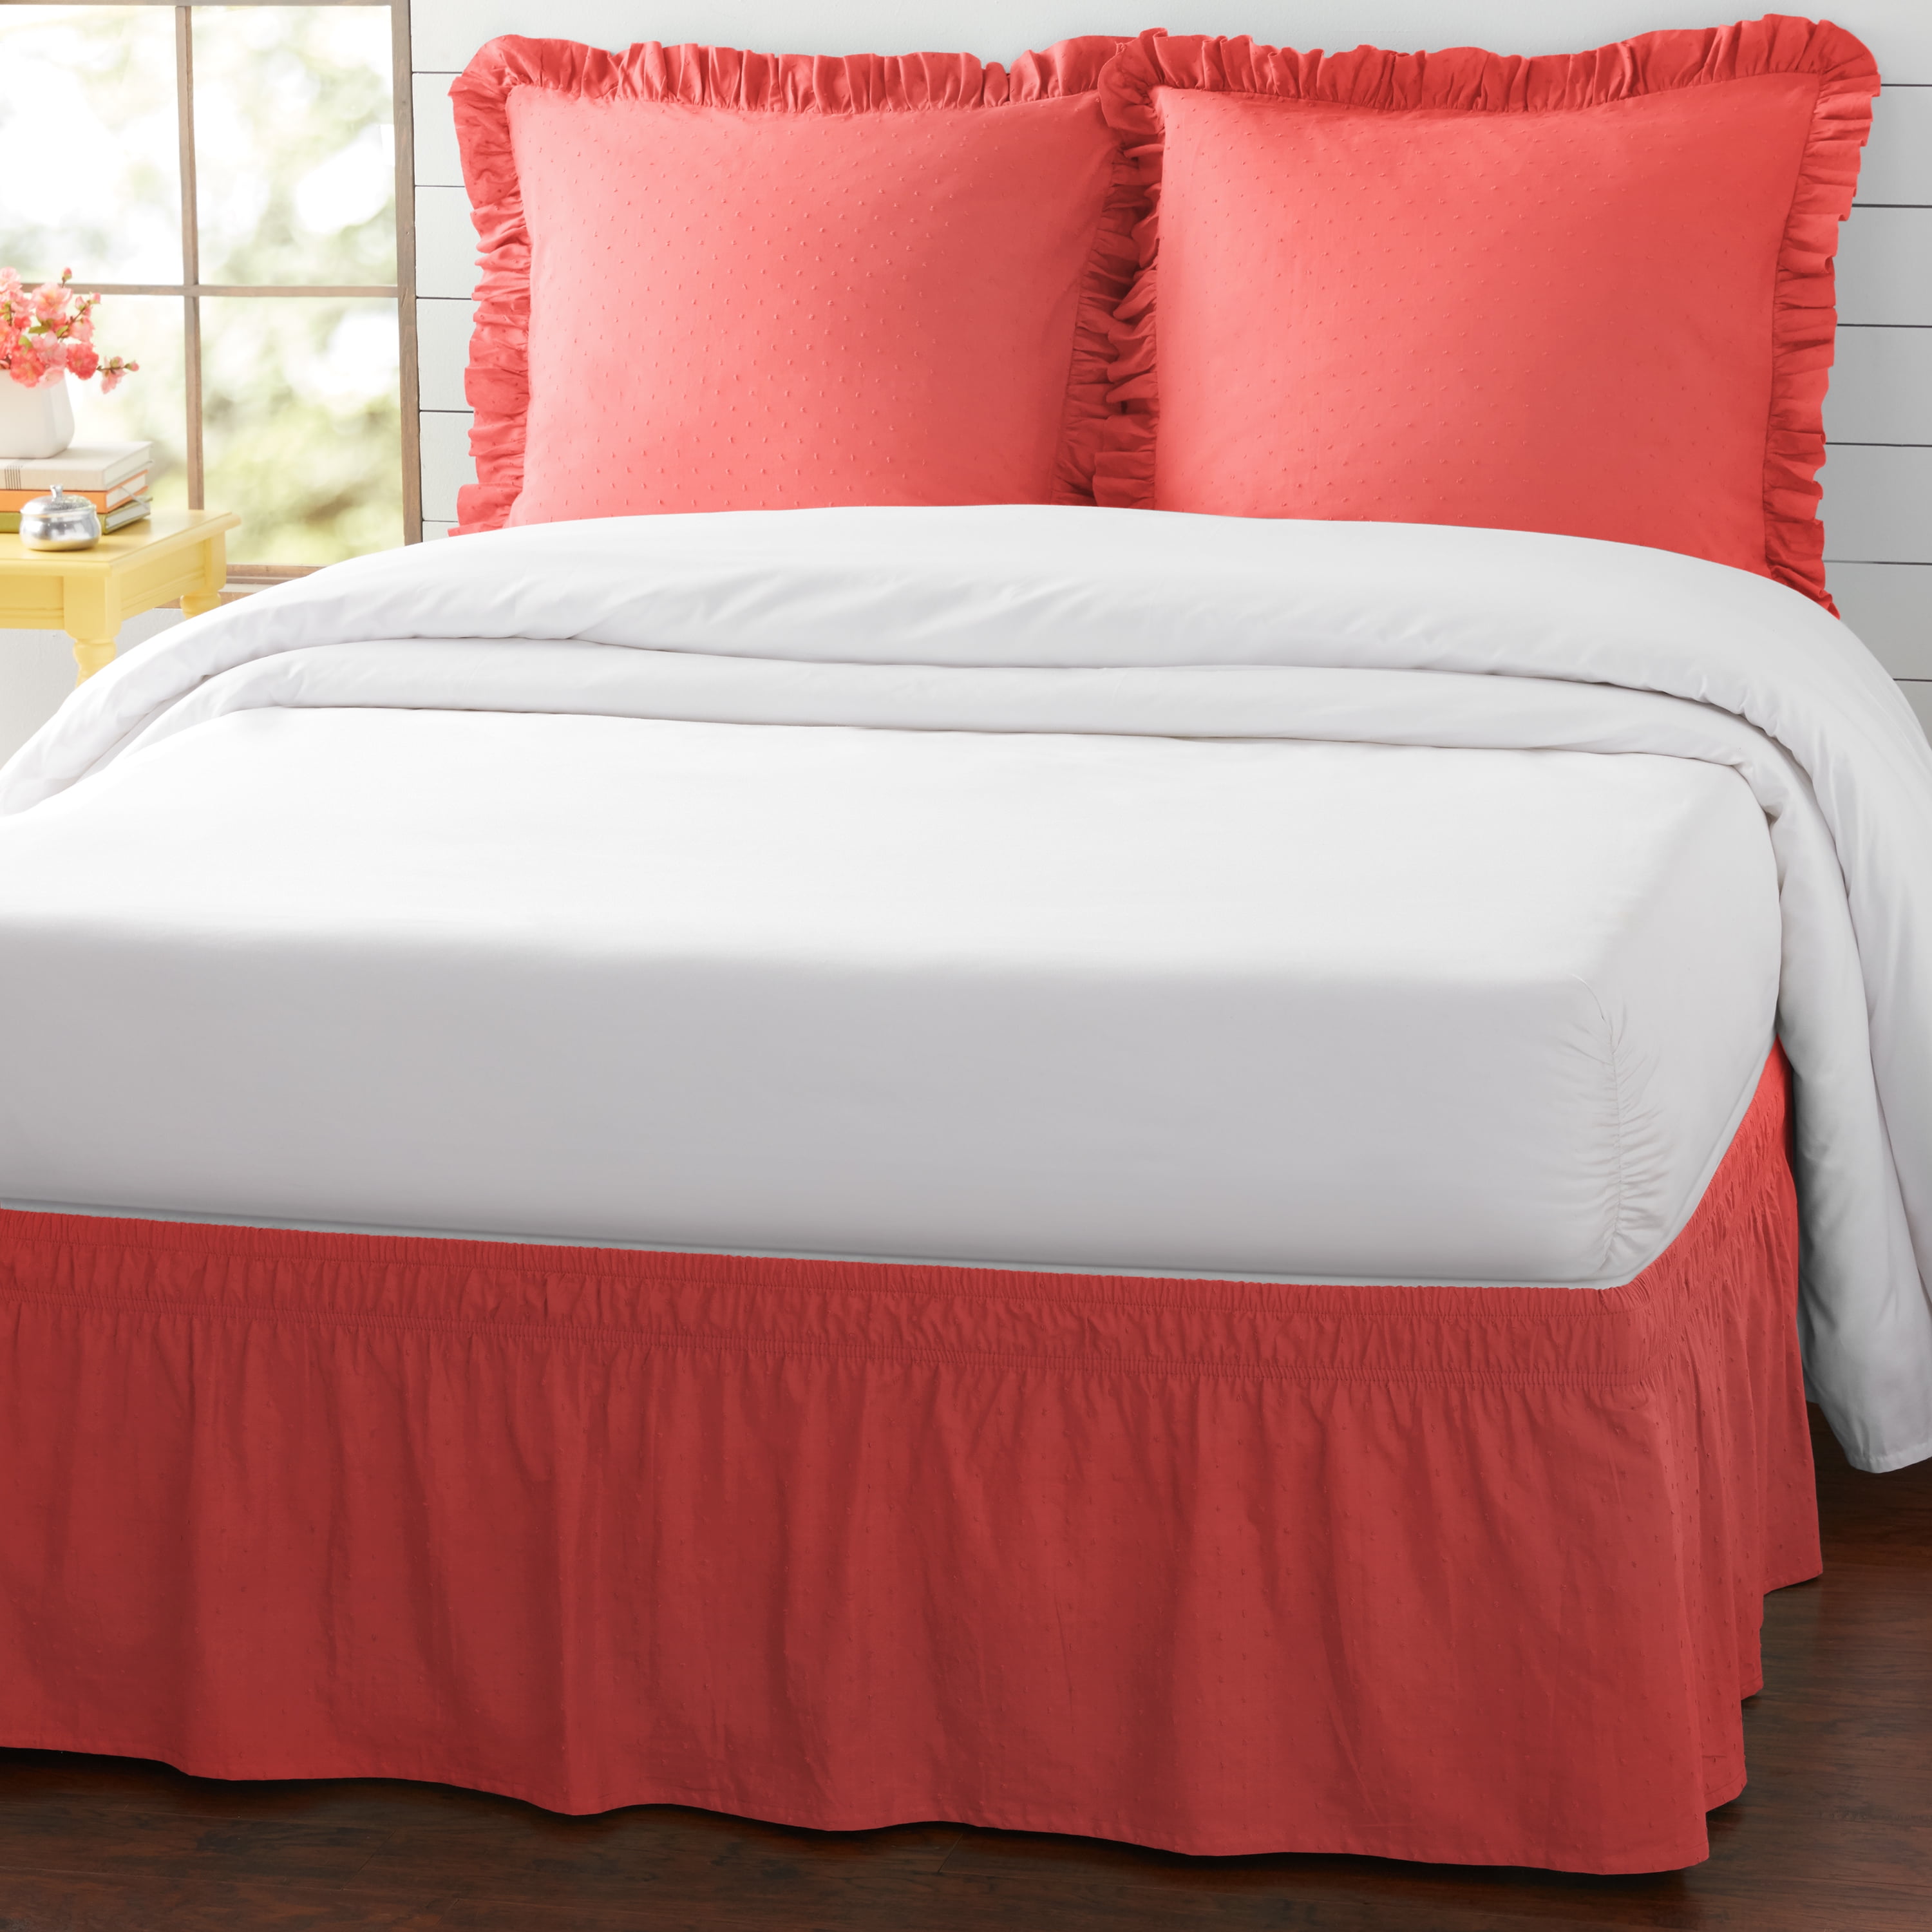 The Pioneer Woman Coral Cotton Swiss Dot 3-Piece Bedskirt and Sham Set $7.02